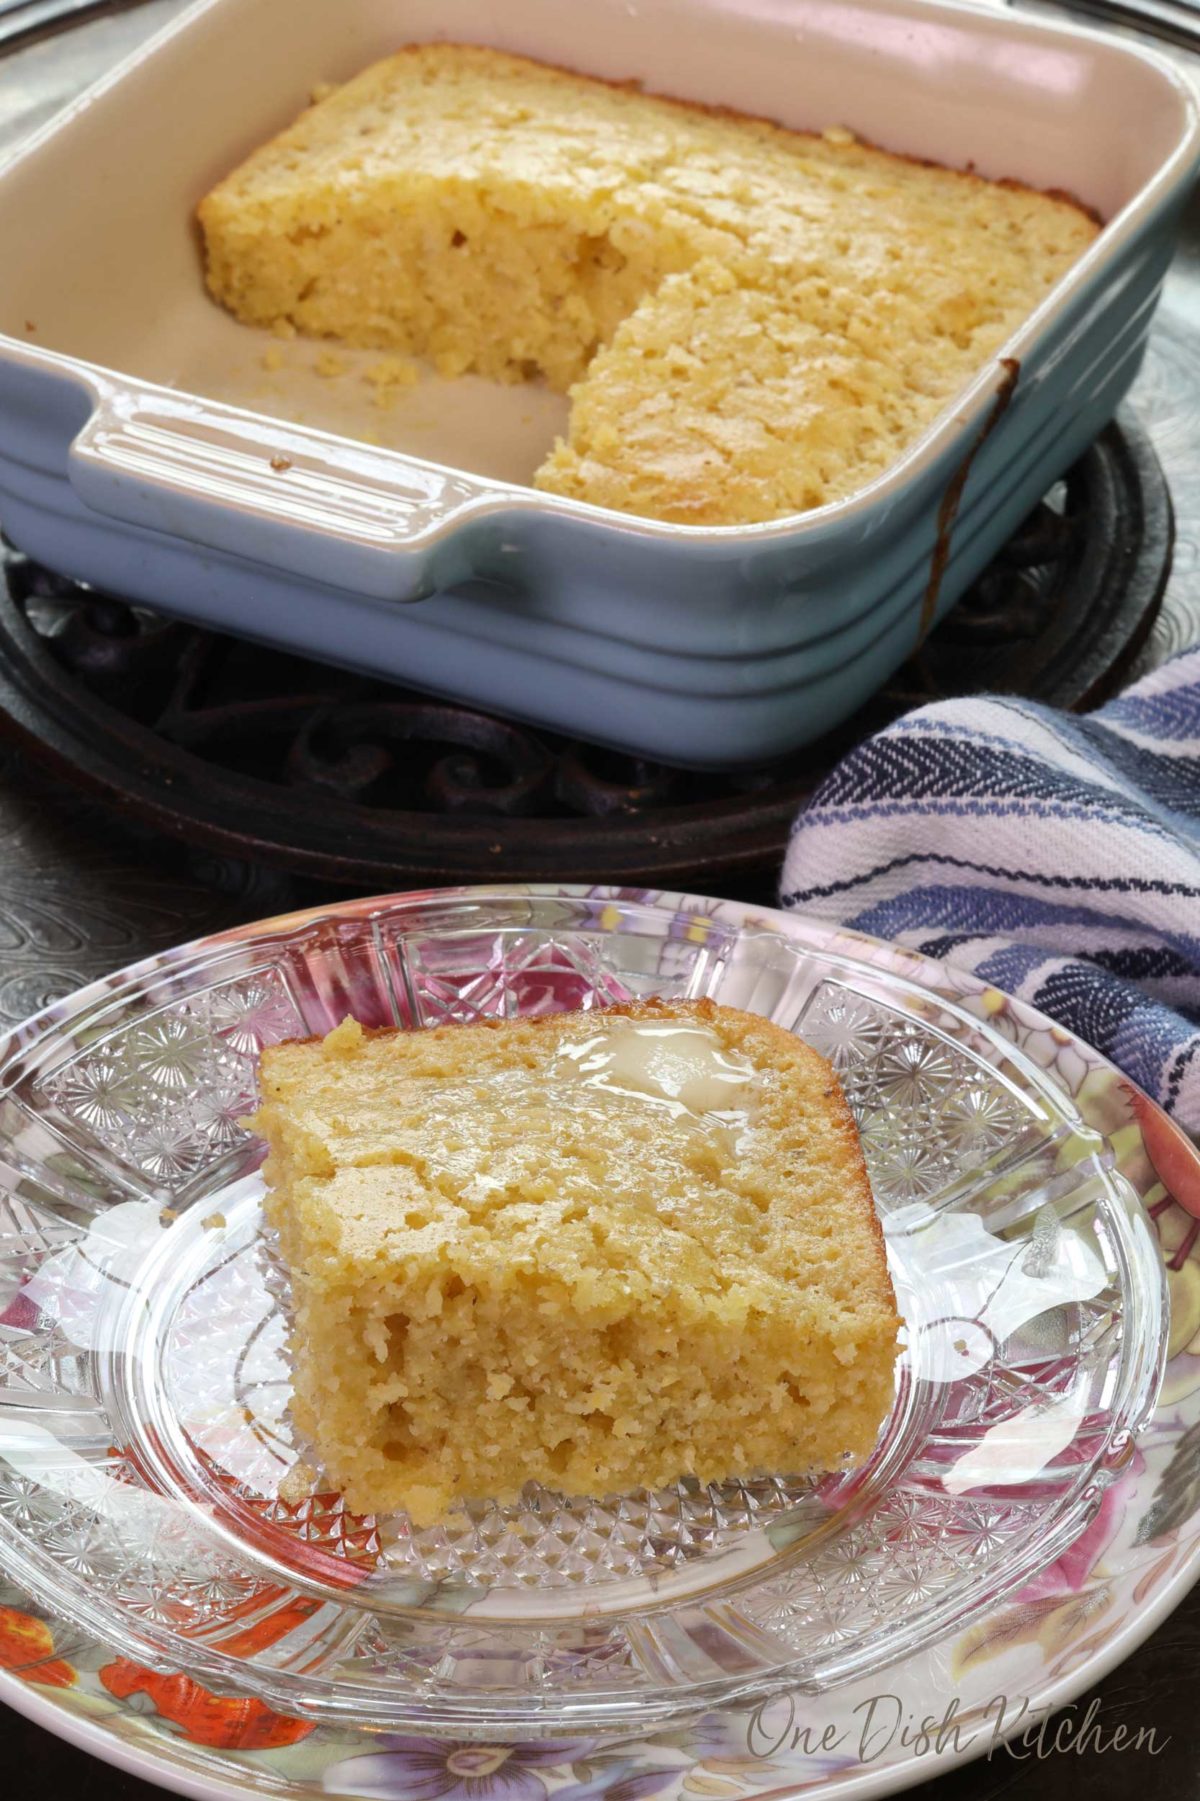 a square piece of cornbread on a floral plate next to a pan filled with three squares of cornbread.